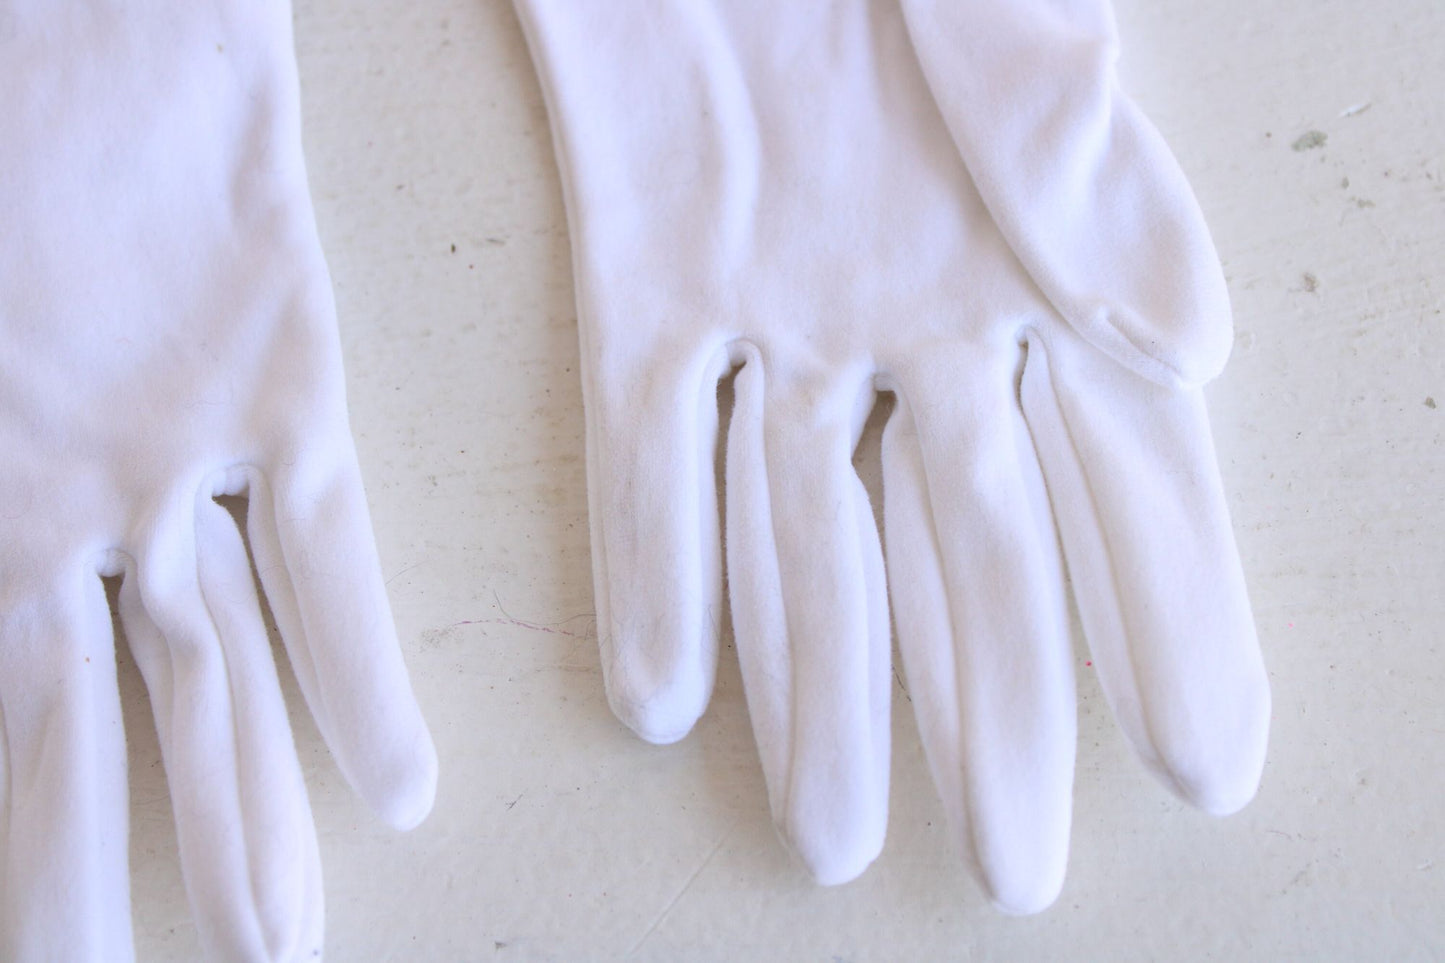 Vintage 1960s Gloves With Bows, Henri Bendel Size 6.5 White Cotton with Navy Blue Stripe